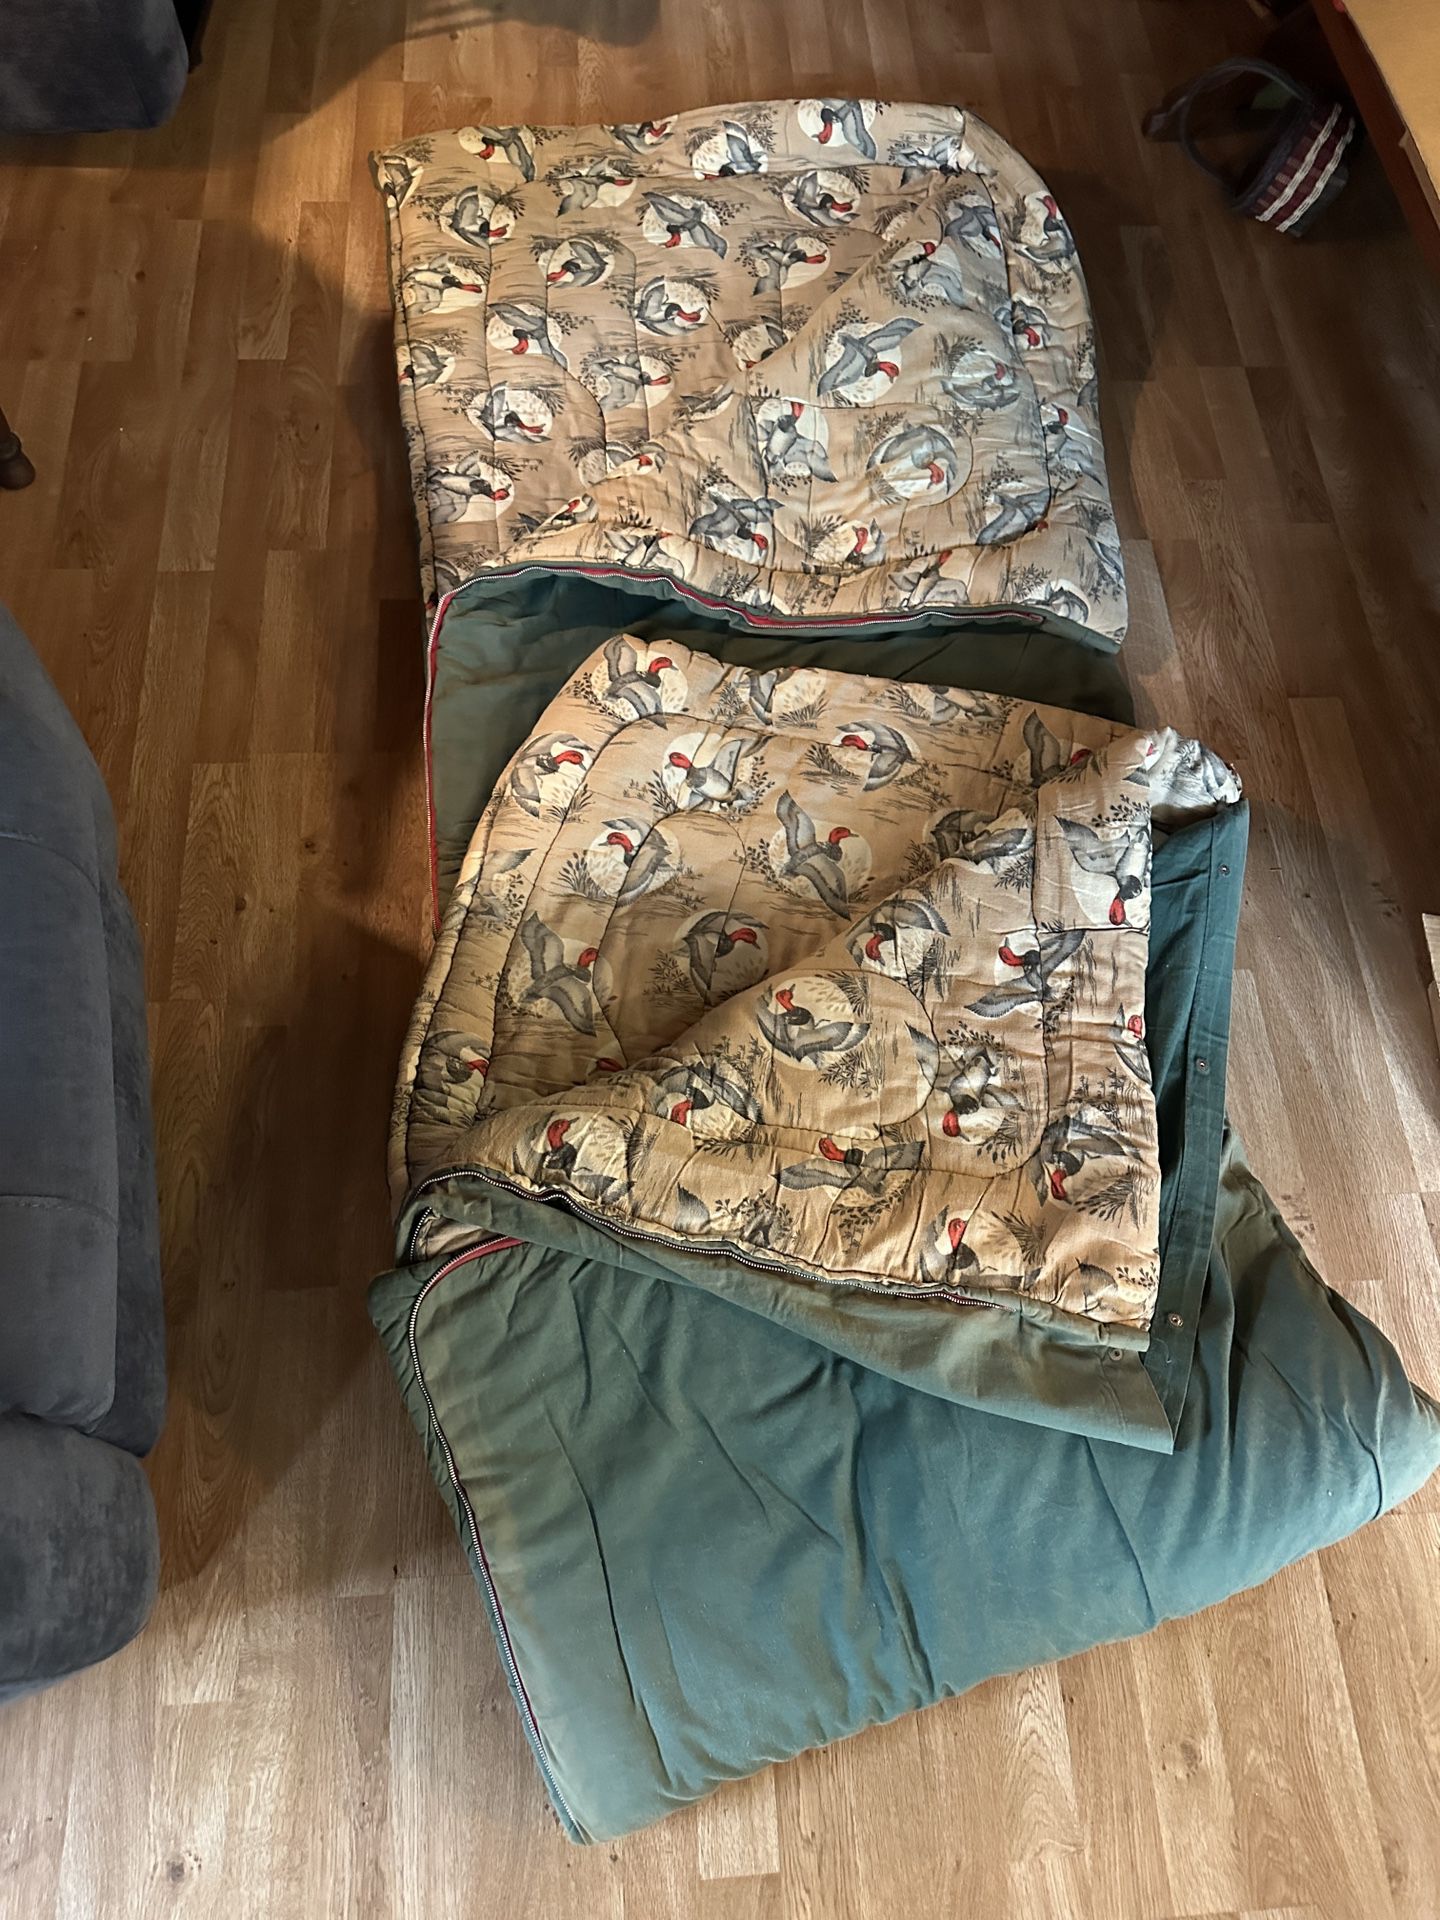 2 Sleeping Bags - Need To Be Cleaned